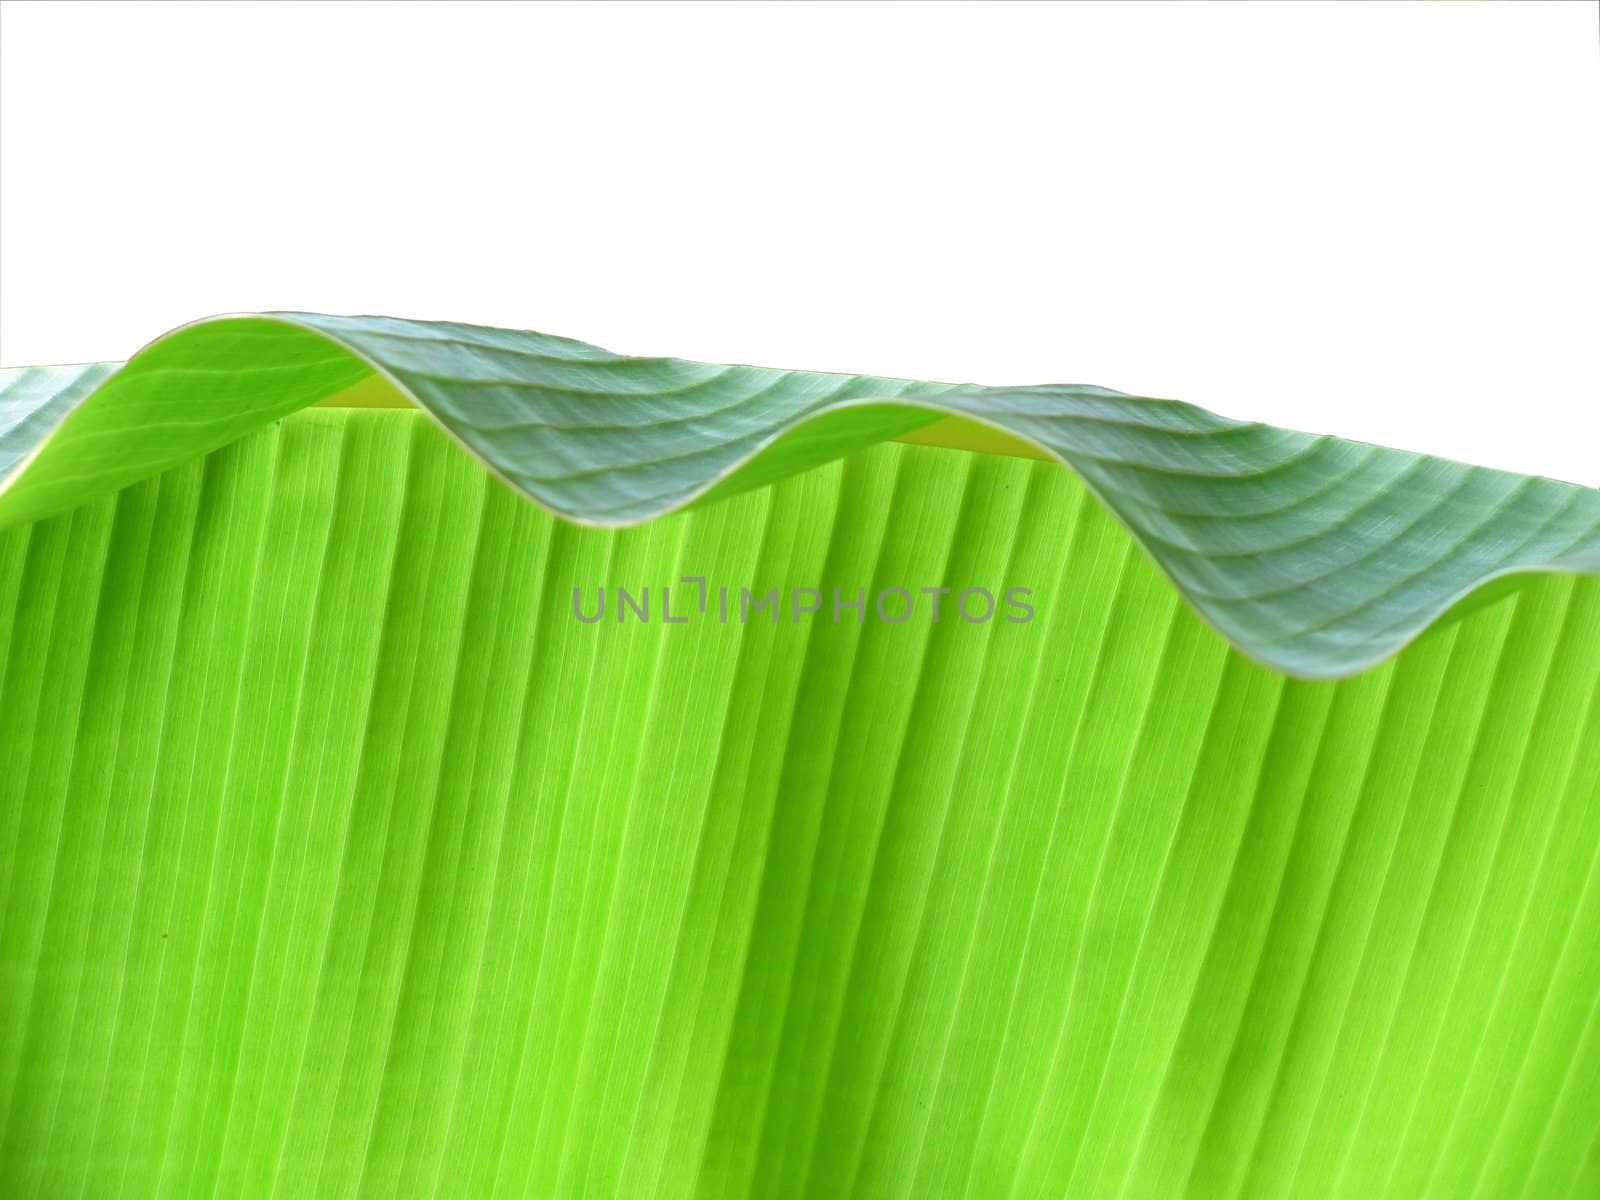 image of banna leaf (top fold) as background and texture